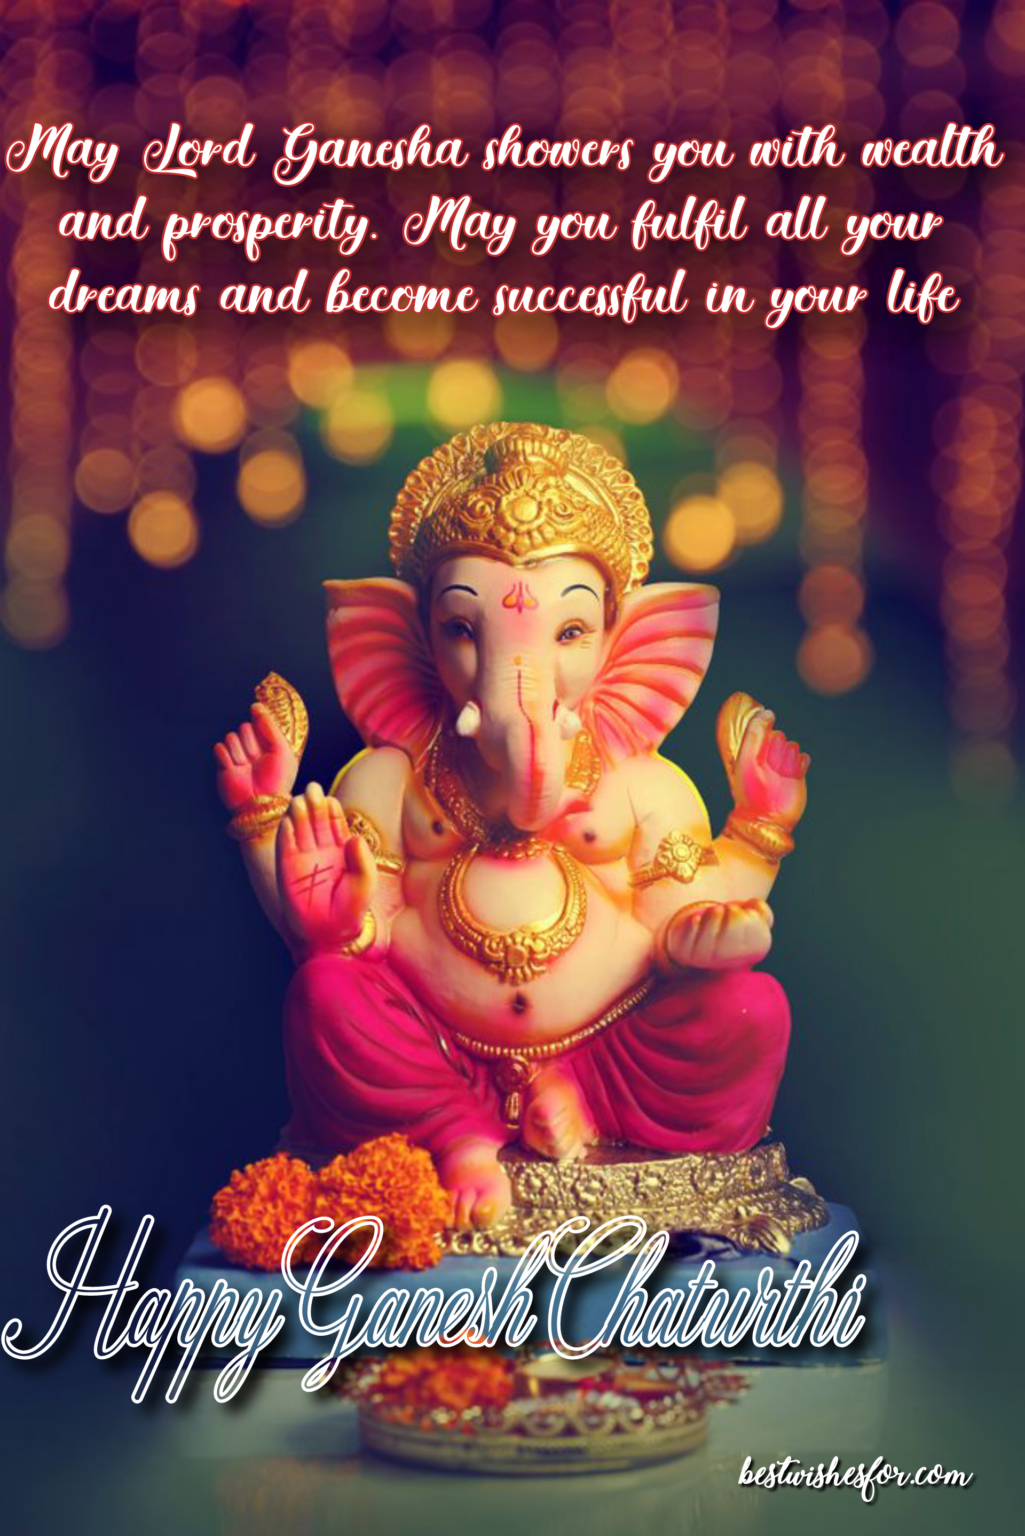 Happy Ganesh Chaturthi 2021 Wishes Quotes Images Messages And Sayings Best Wishes 8422